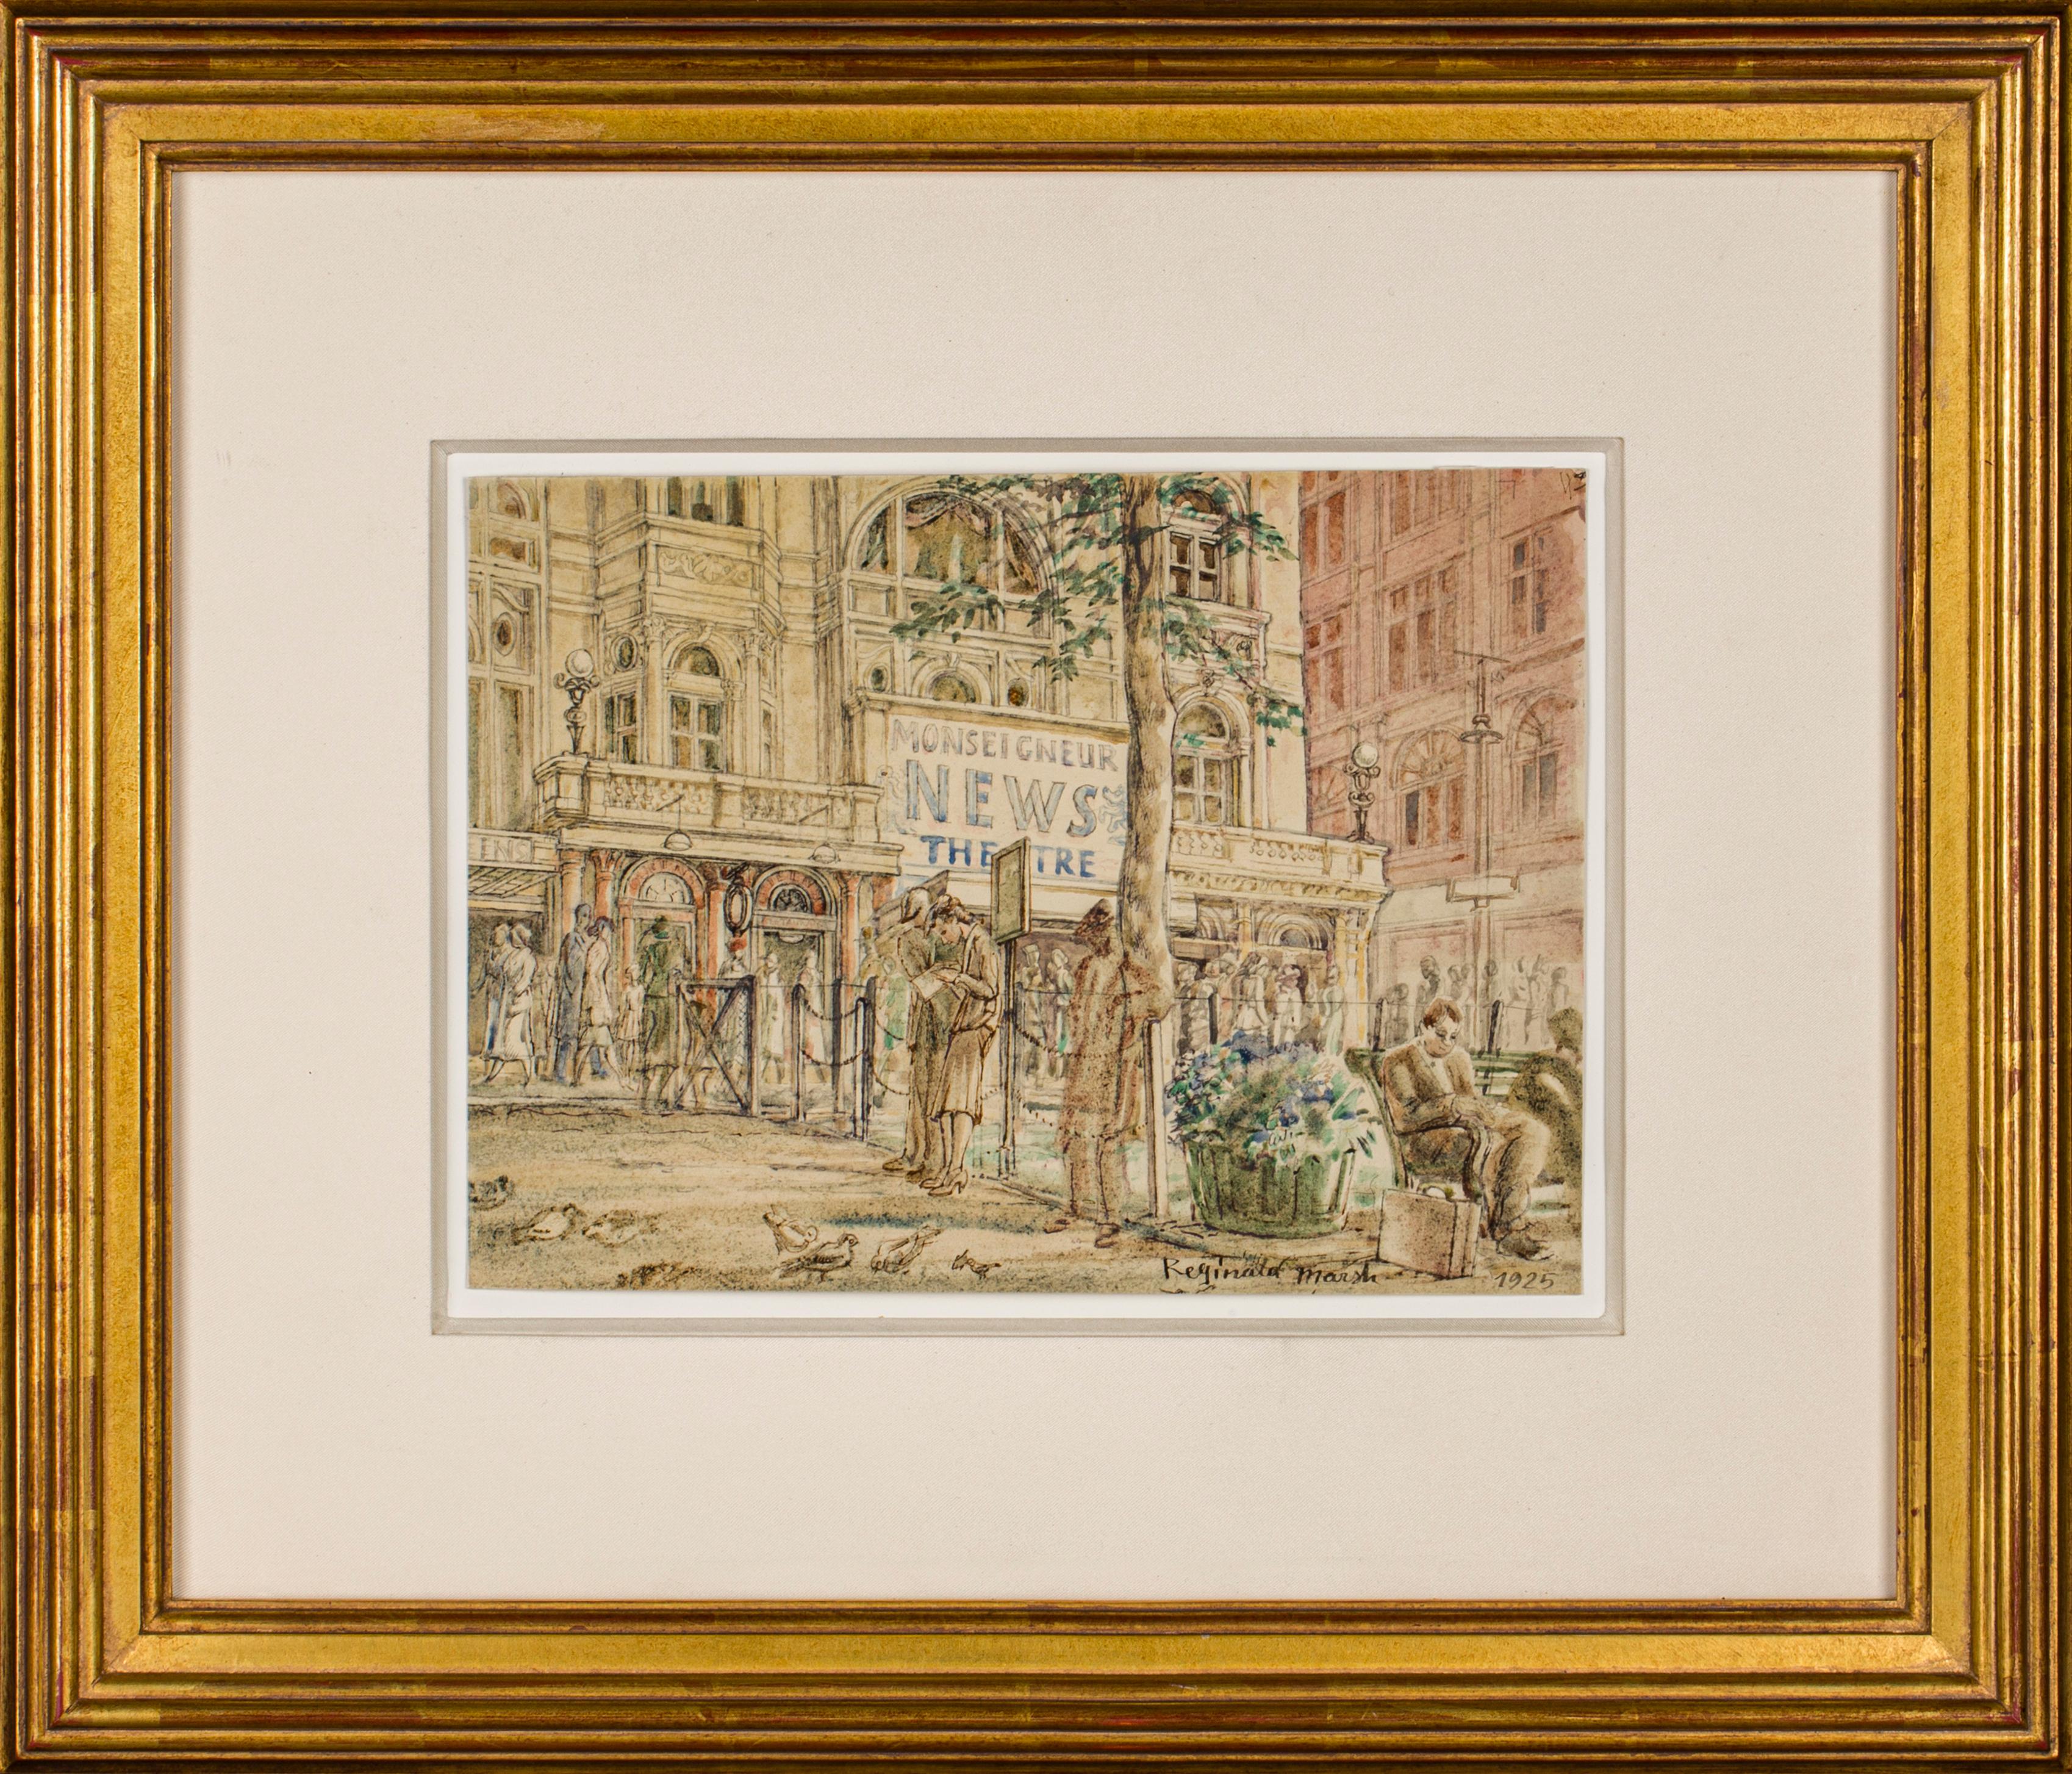 Watercolor Painting of the Monseigneur News Theatre, by Reginald Marsh, 1925 For Sale 1